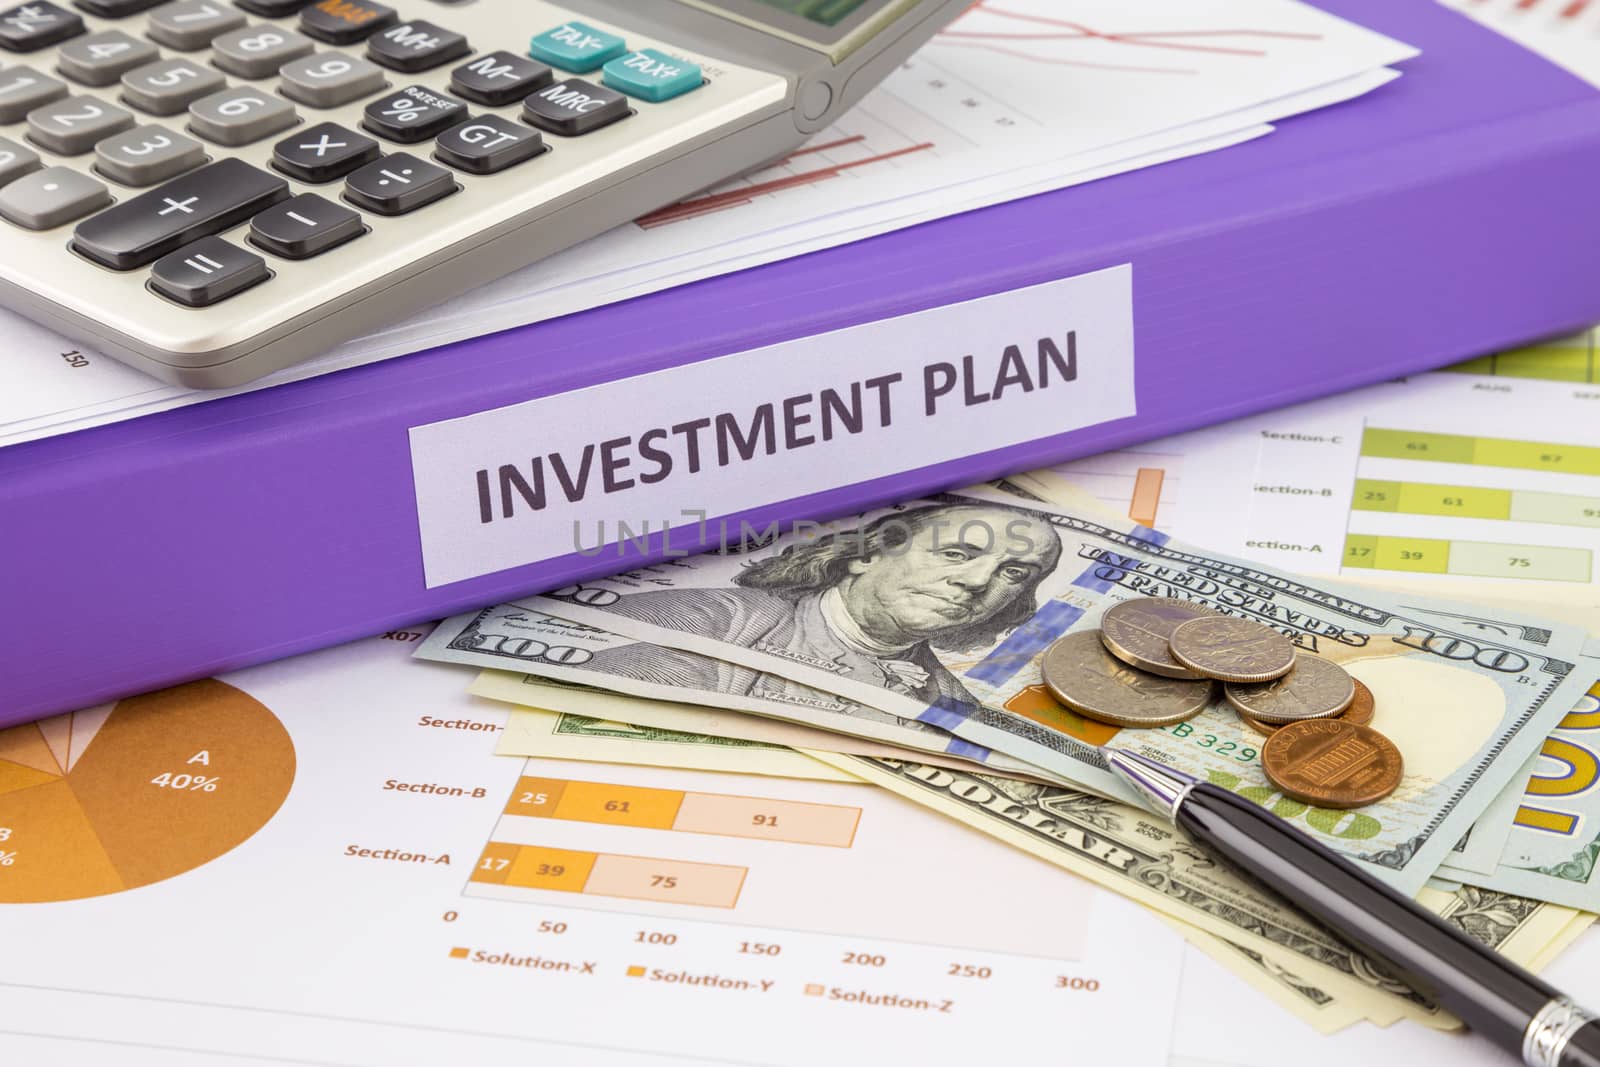 Money for budget management and investment plan by vinnstock